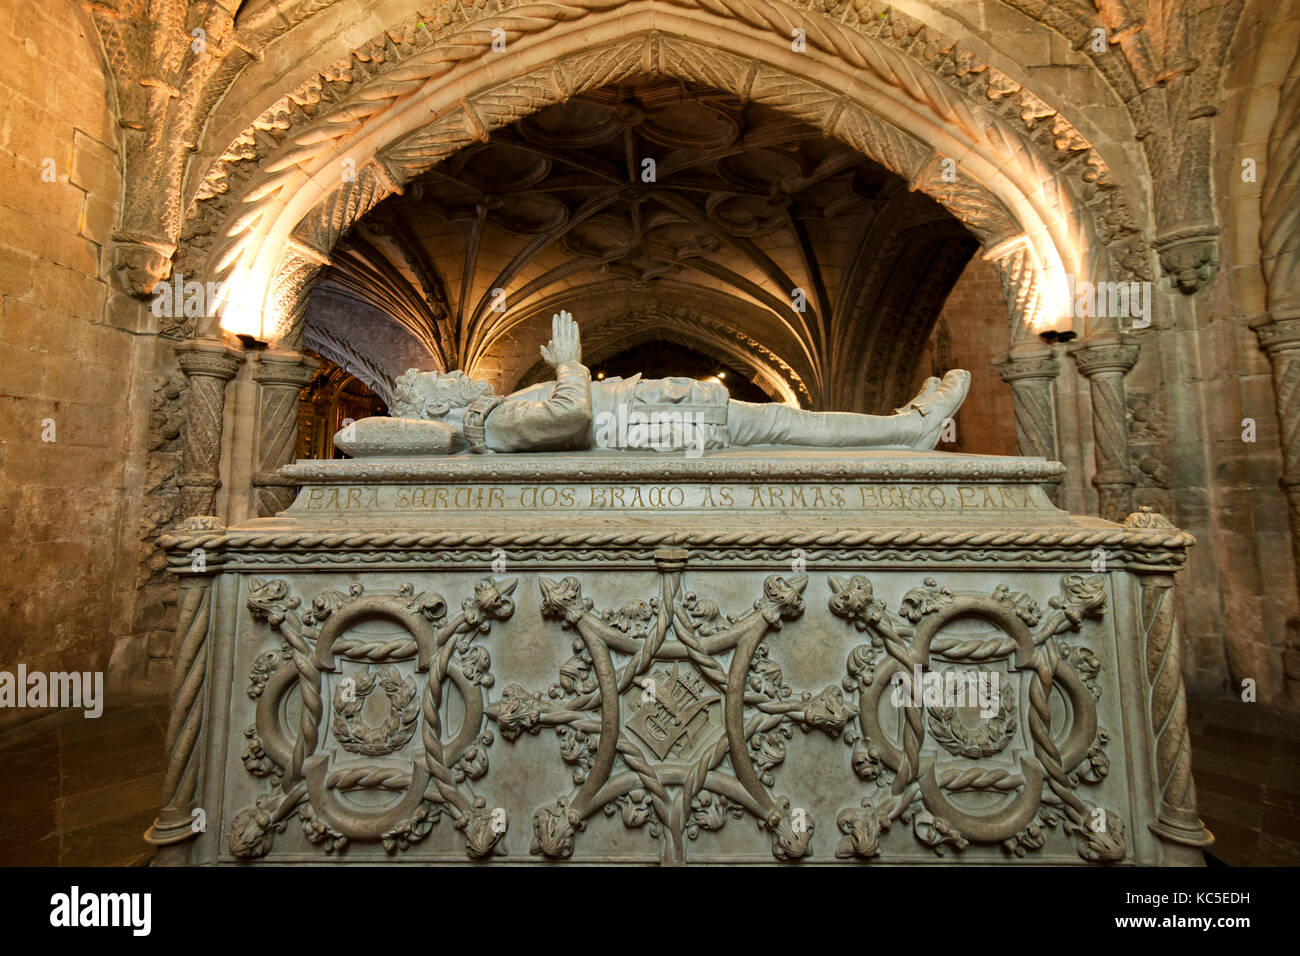 Tomb of Luis de Camoes inside the church of the Jeronimos Monastery, a Unesco World Heritage Site. Lisbon, Portugal Stock Photo